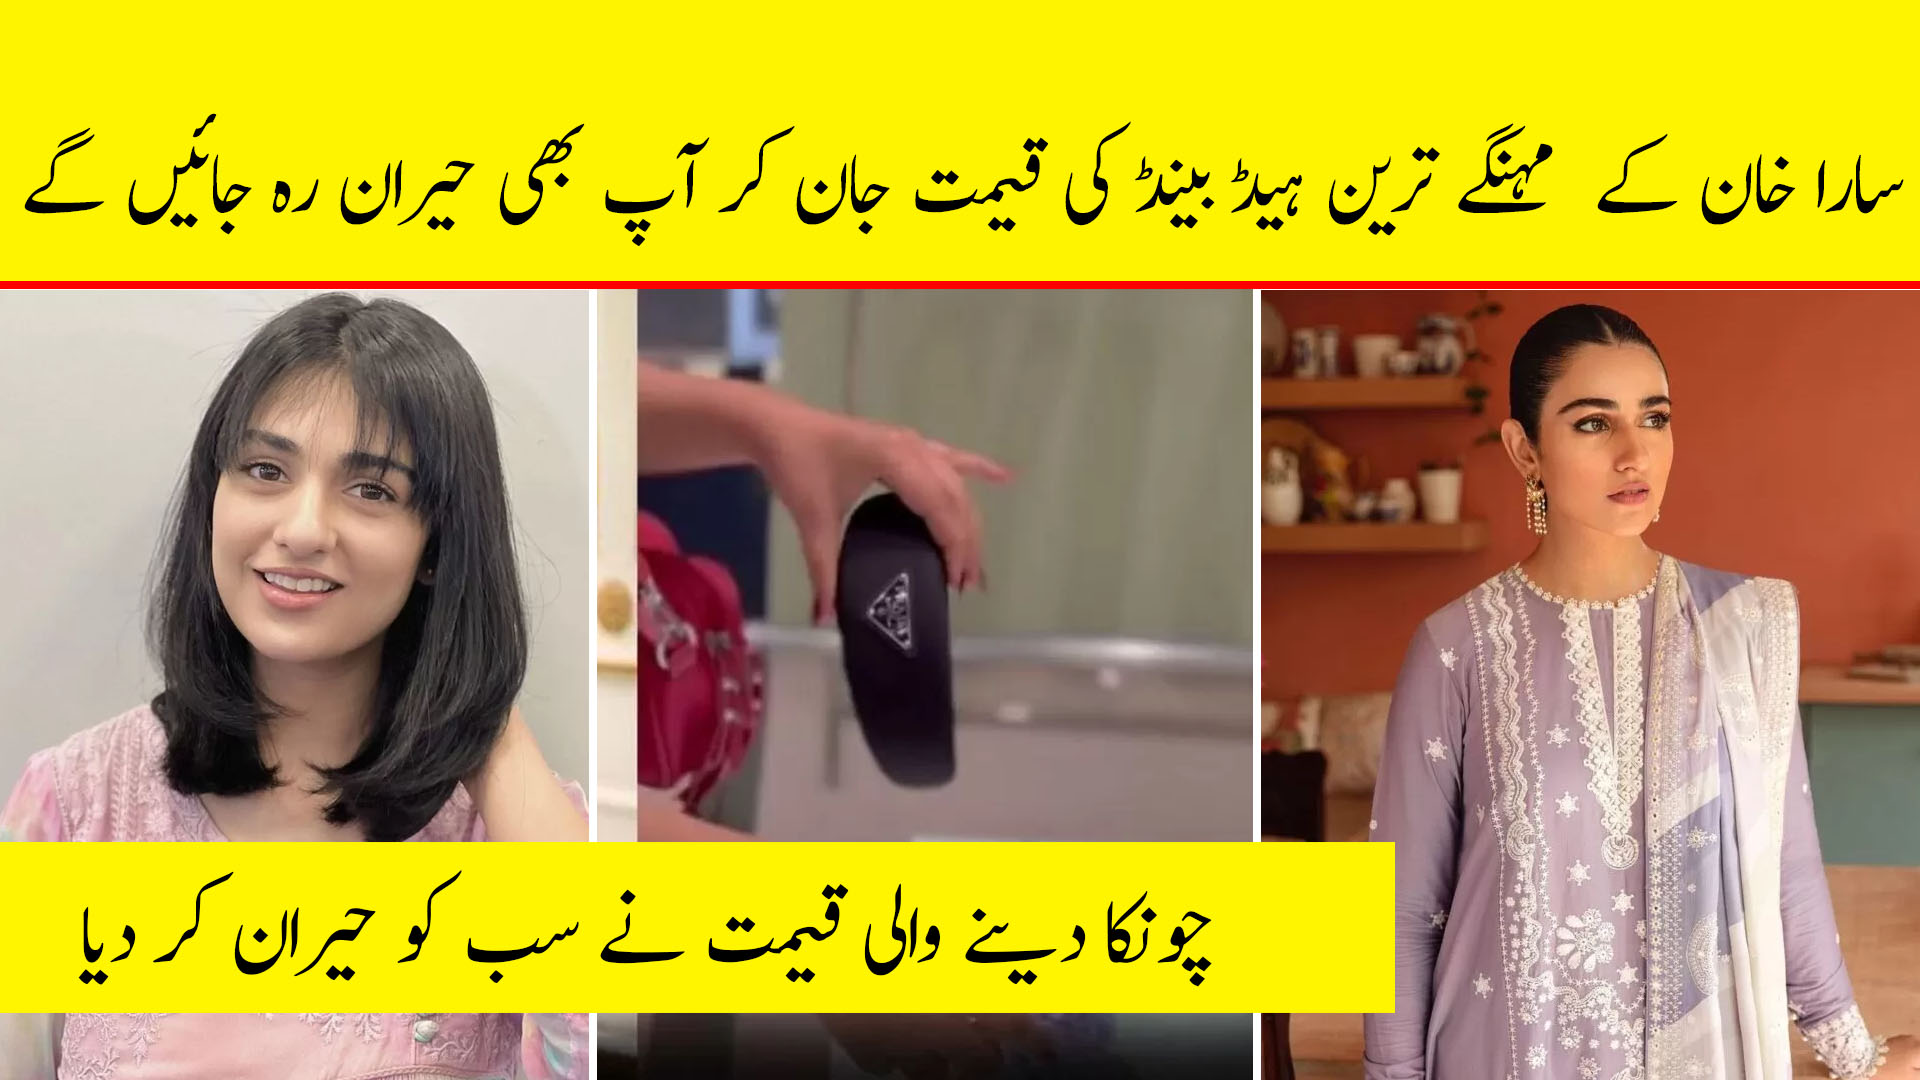 Sarah Khan head band price will truly shock you!